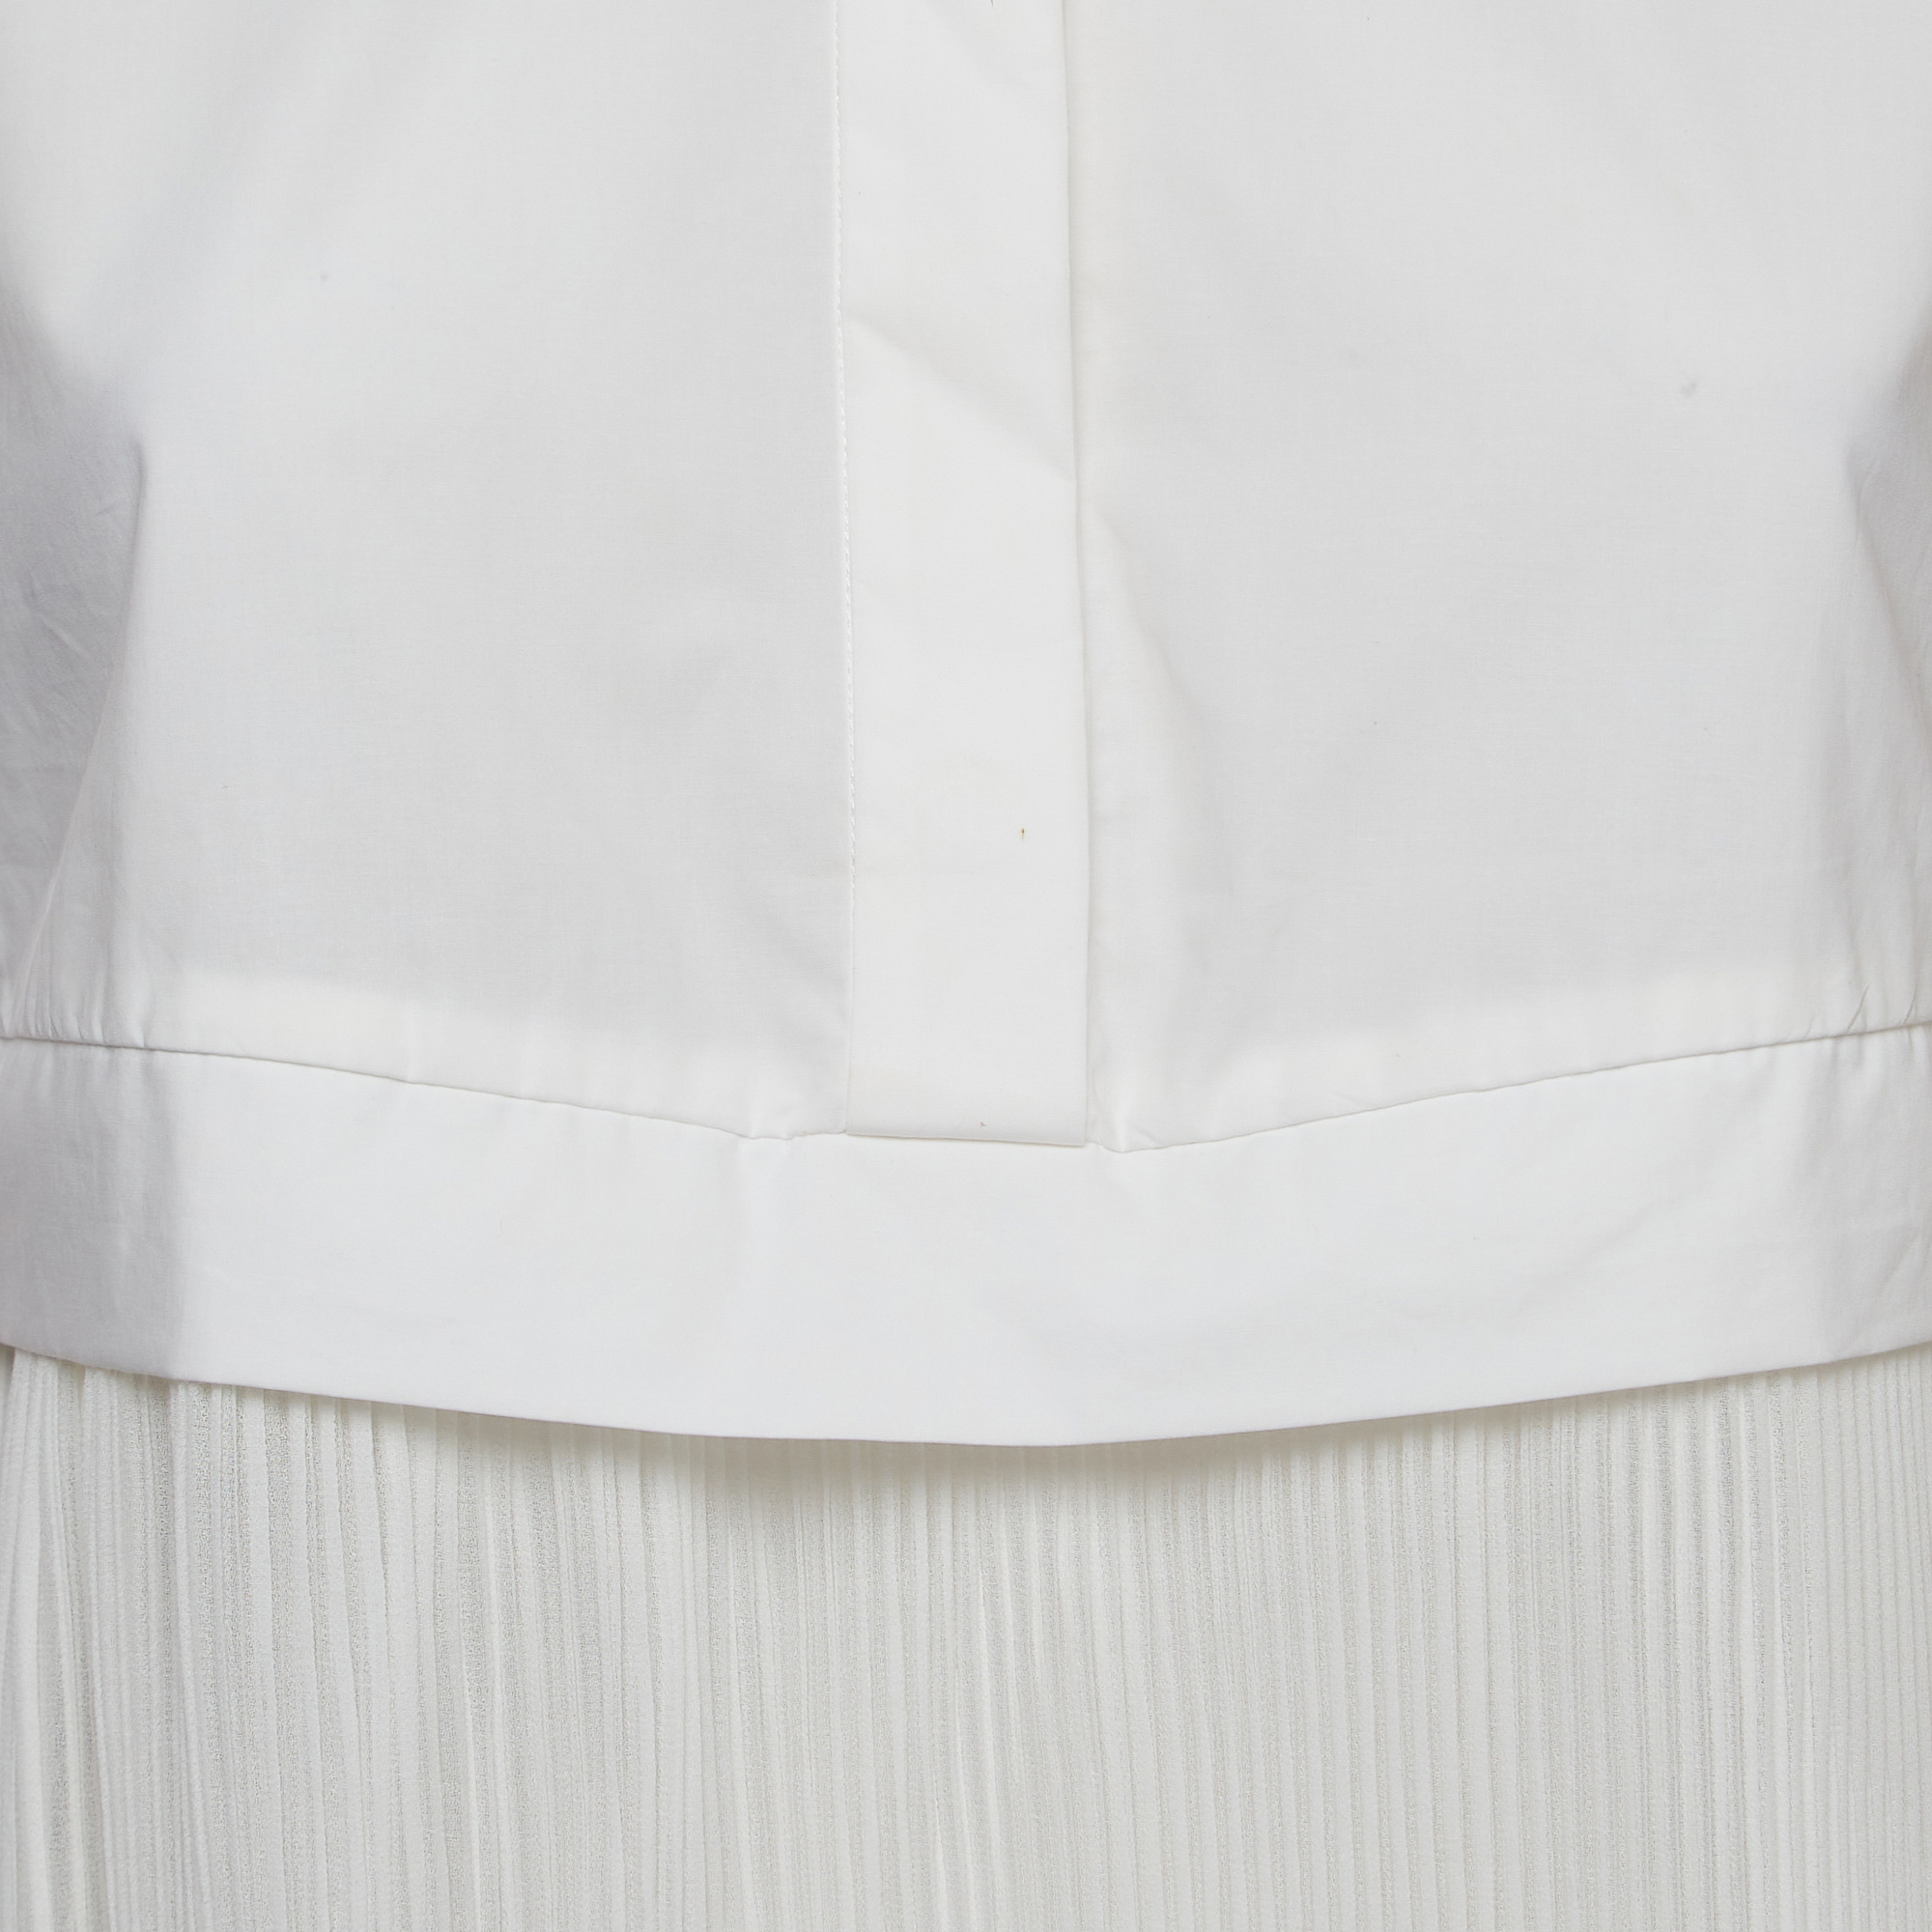 McQ By Alexander McQueen White Cotton Pleated Sleeveless Blouse S